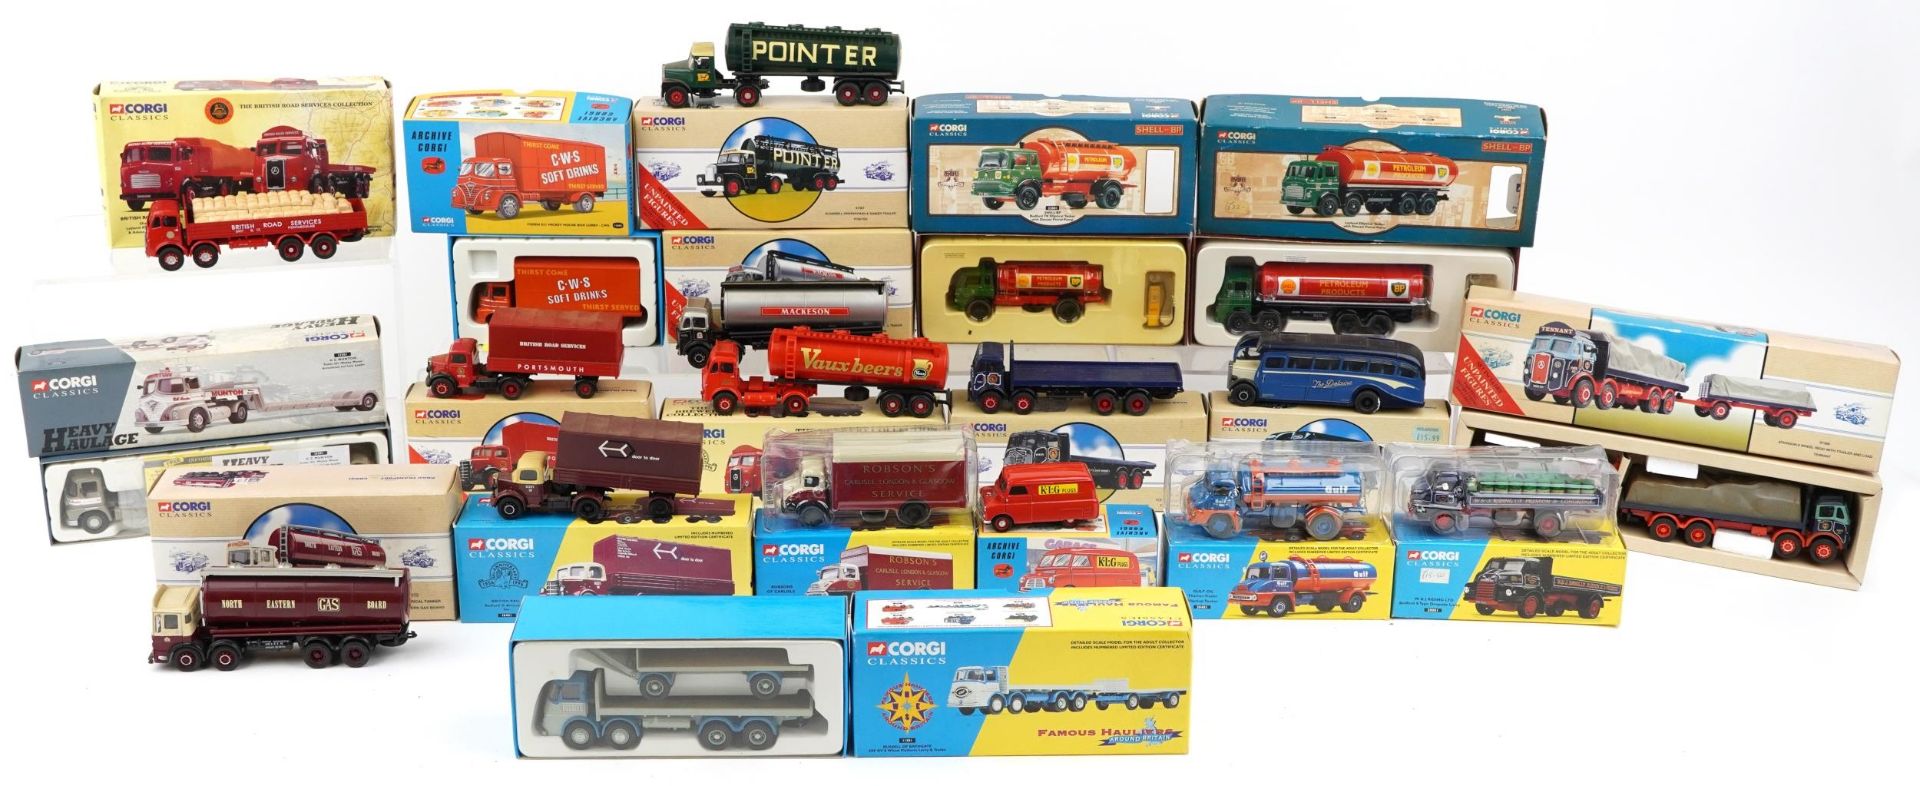 Corgi diecast model vehicles with boxes including flatbed lorries, Gulf oil tanker and Shell oil